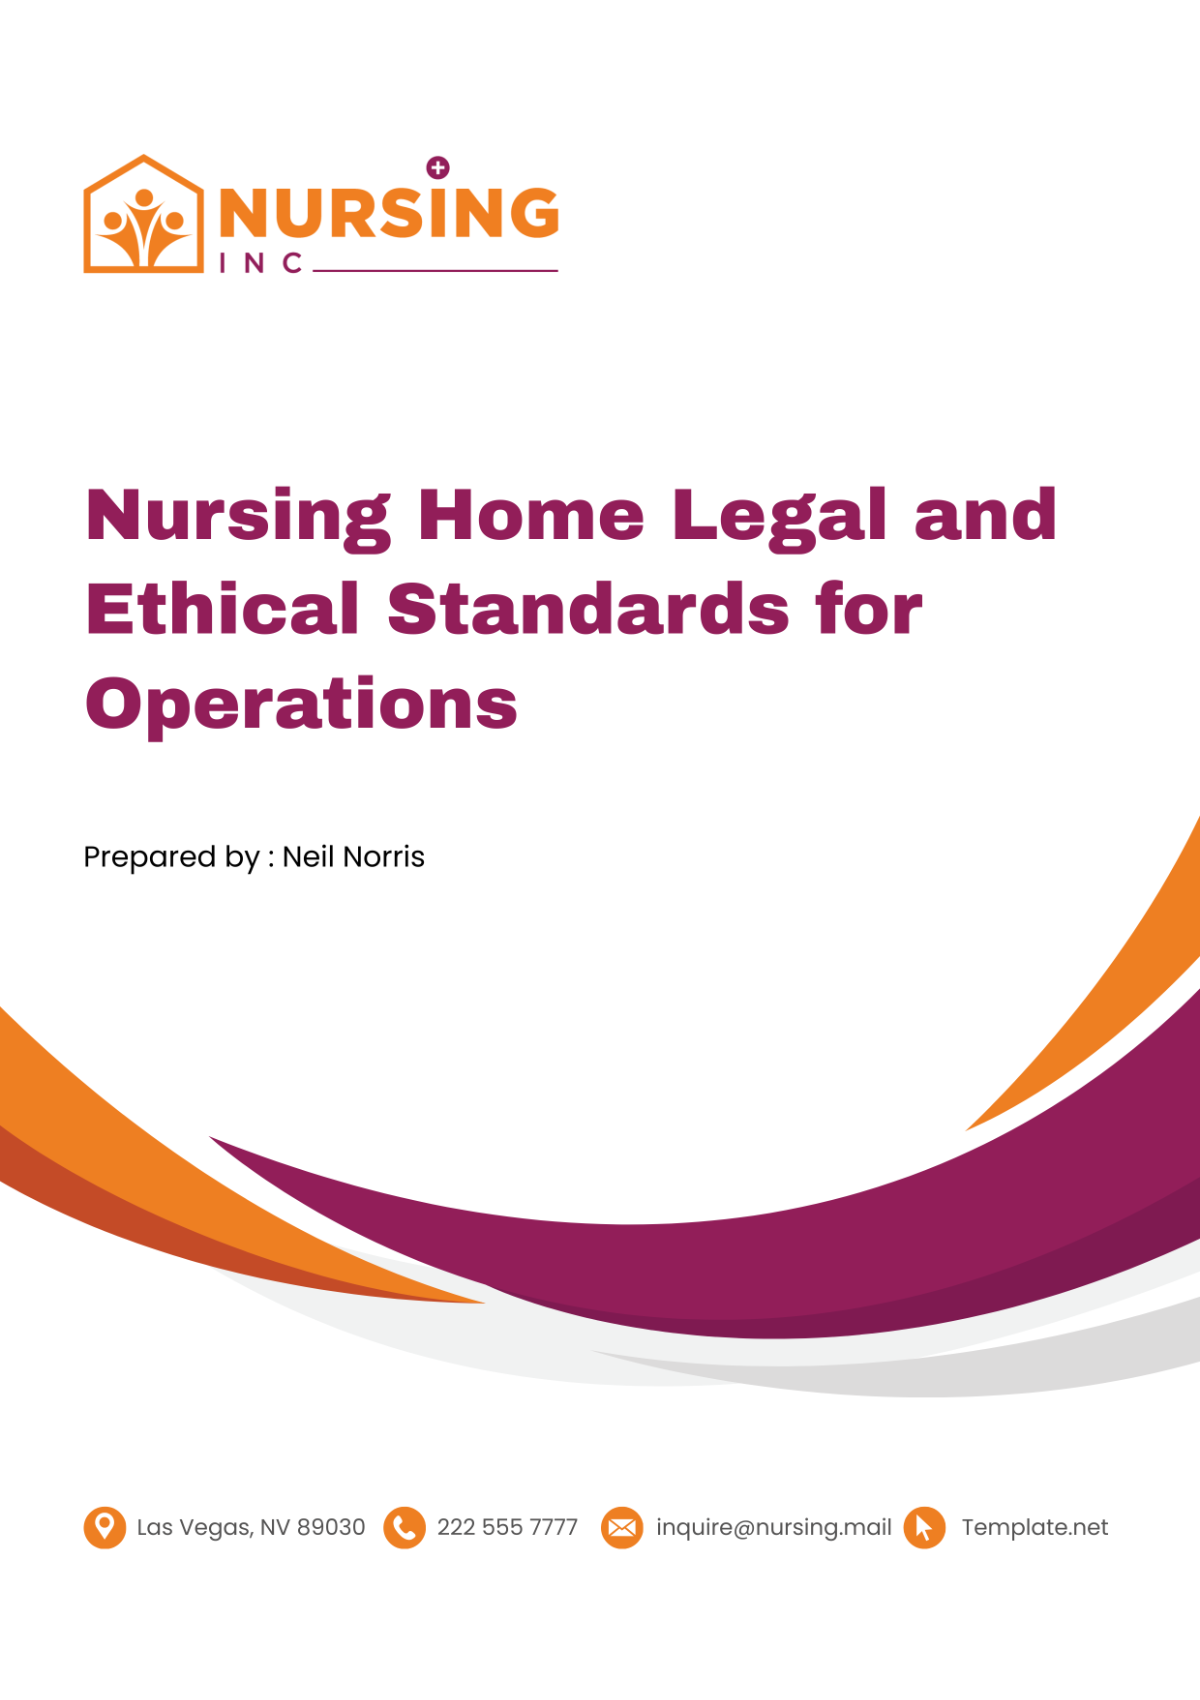 Nursing Home Legal and Ethical Standards for Operations Template